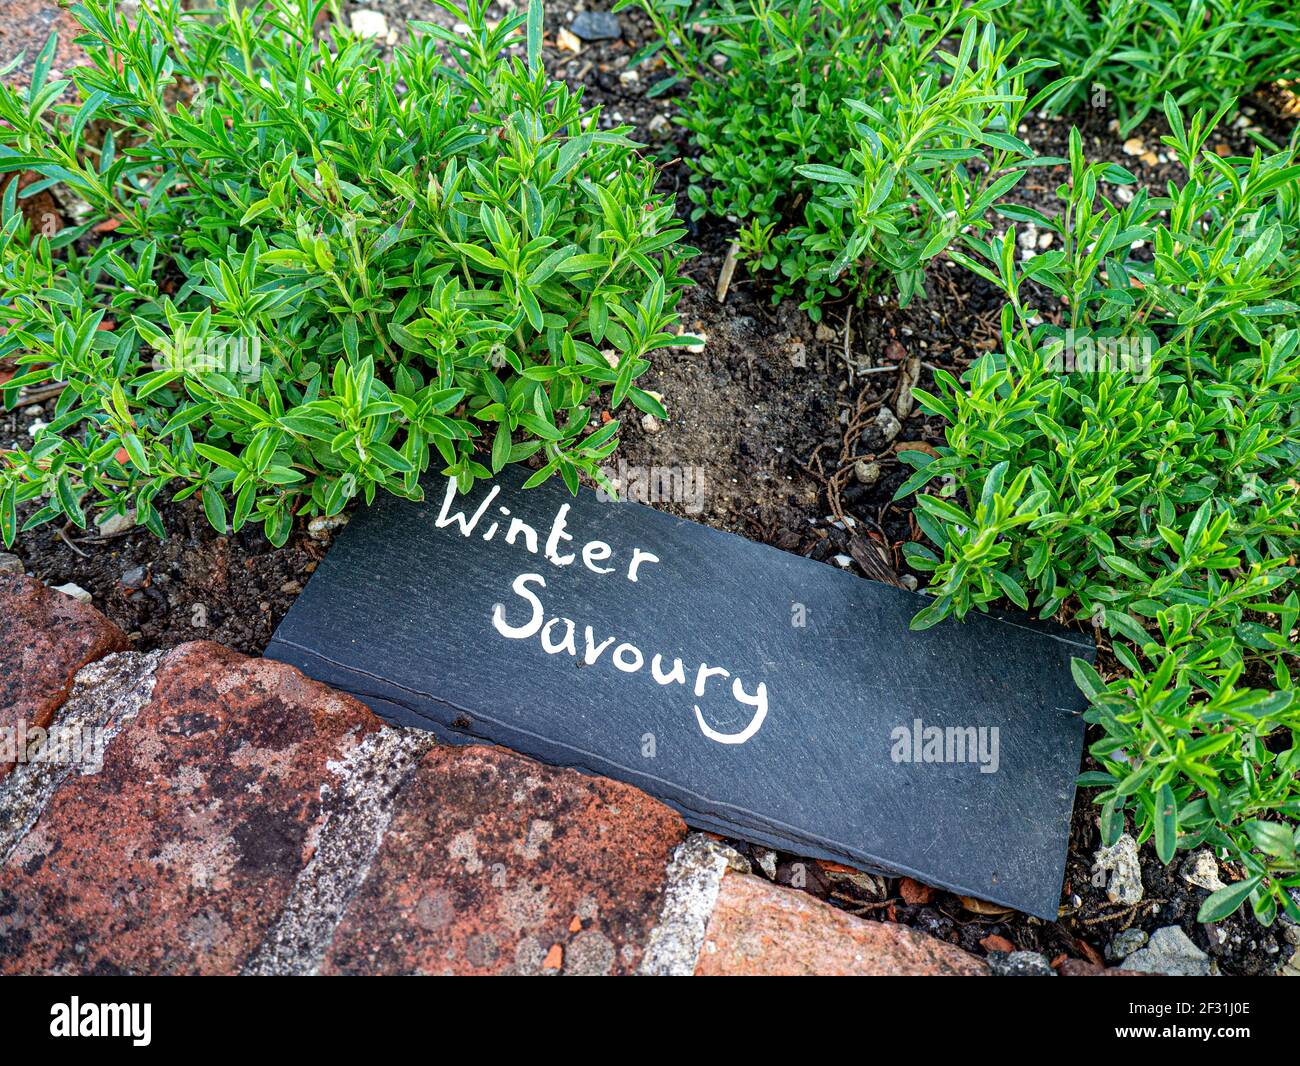 Winter savoury herb & slate label [Satureja montana], perennial, semi-evergreen in family Lamiaceae, native to warm temperate regions Southern Europe Stock Photo